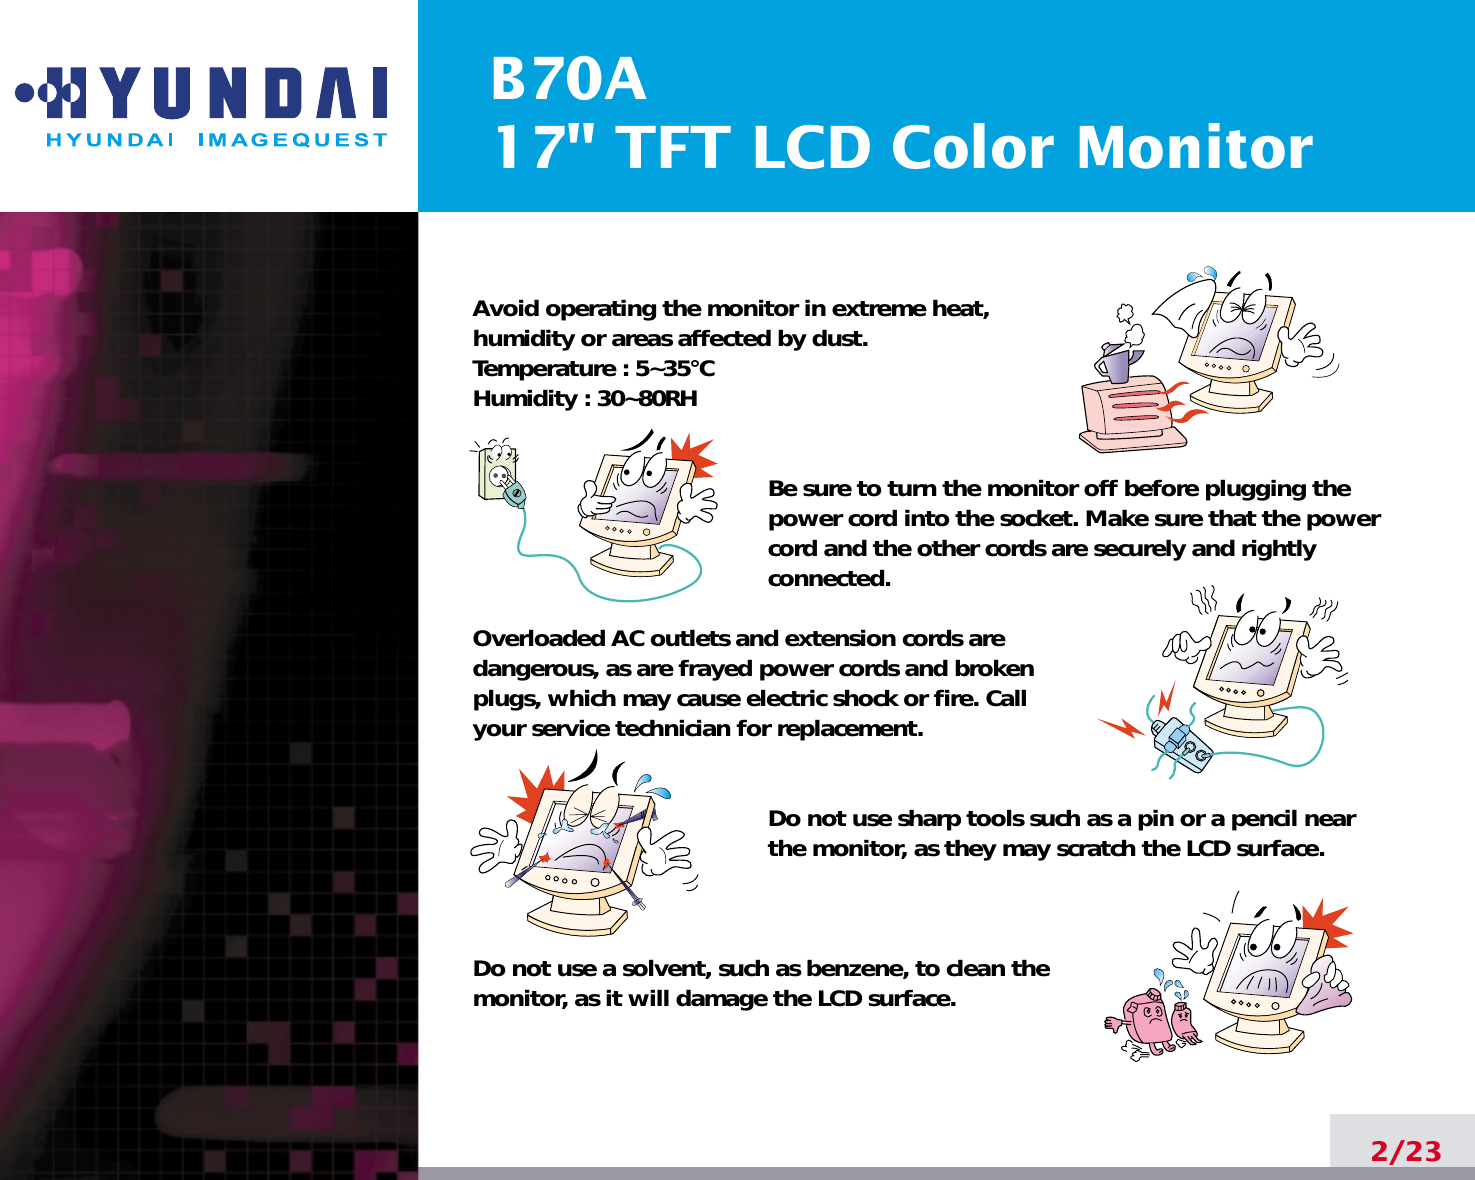 B70A17&quot; TFT LCD Color Monitor2/23Avoid operating the monitor in extreme heat, humidity or areas affected by dust. Temperature : 5~35°CHumidity : 30~80RH Be sure to turn the monitor off before plugging thepower cord into the socket. Make sure that the powercord and the other cords are securely and rightlyconnected.Overloaded AC outlets and extension cords are dangerous, as are frayed power cords and broken plugs, which may cause electric shock or fire. Call your service technician for replacement.Do not use sharp tools such as a pin or a pencil near the monitor, as they may scratch the LCD surface.Do not use a solvent, such as benzene, to clean the monitor, as it will damage the LCD surface.